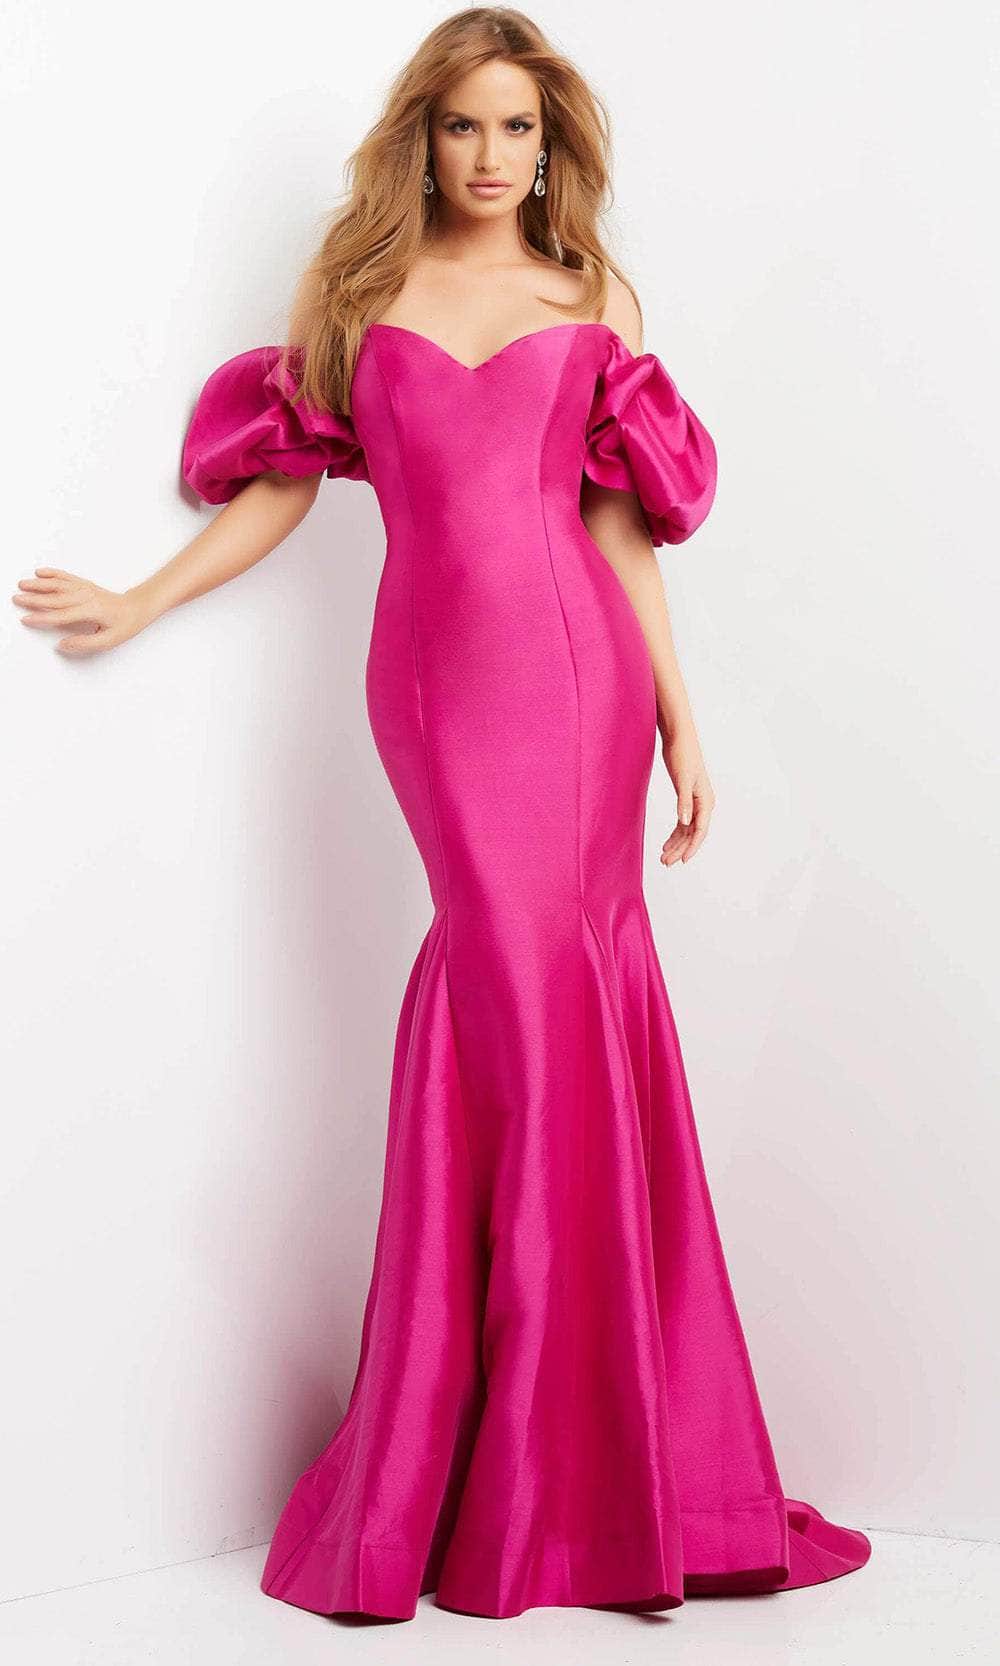 Jovani 09031 - Puff Sleeve Off Shoulder Evening Dress Special Occasion Dress 00 / Orchid